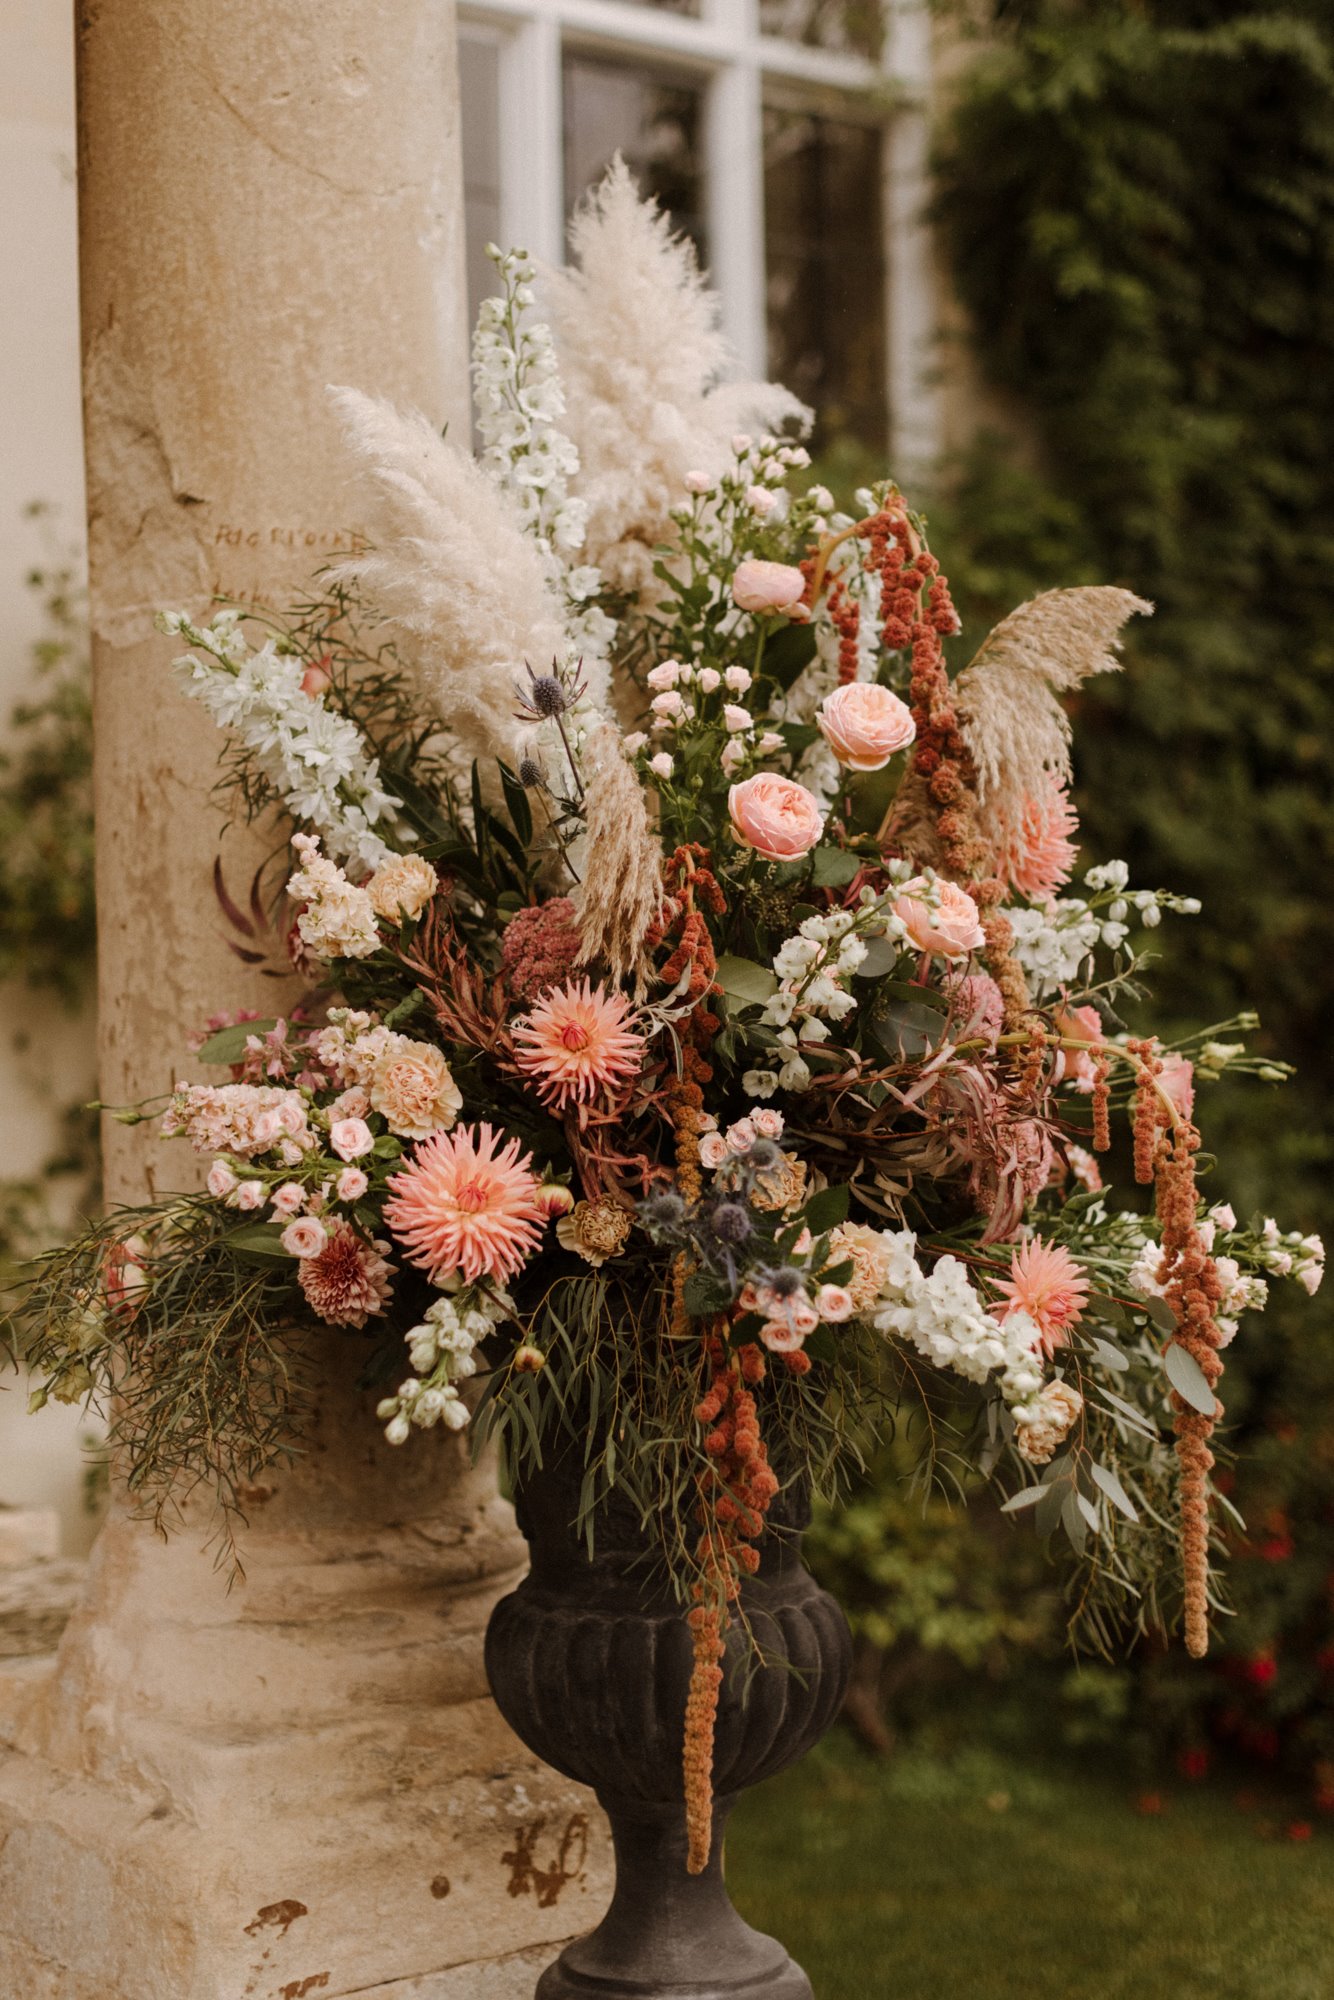 Boho luxe pink and white september wedding flowers in urn outside stately home venue in cotswolds